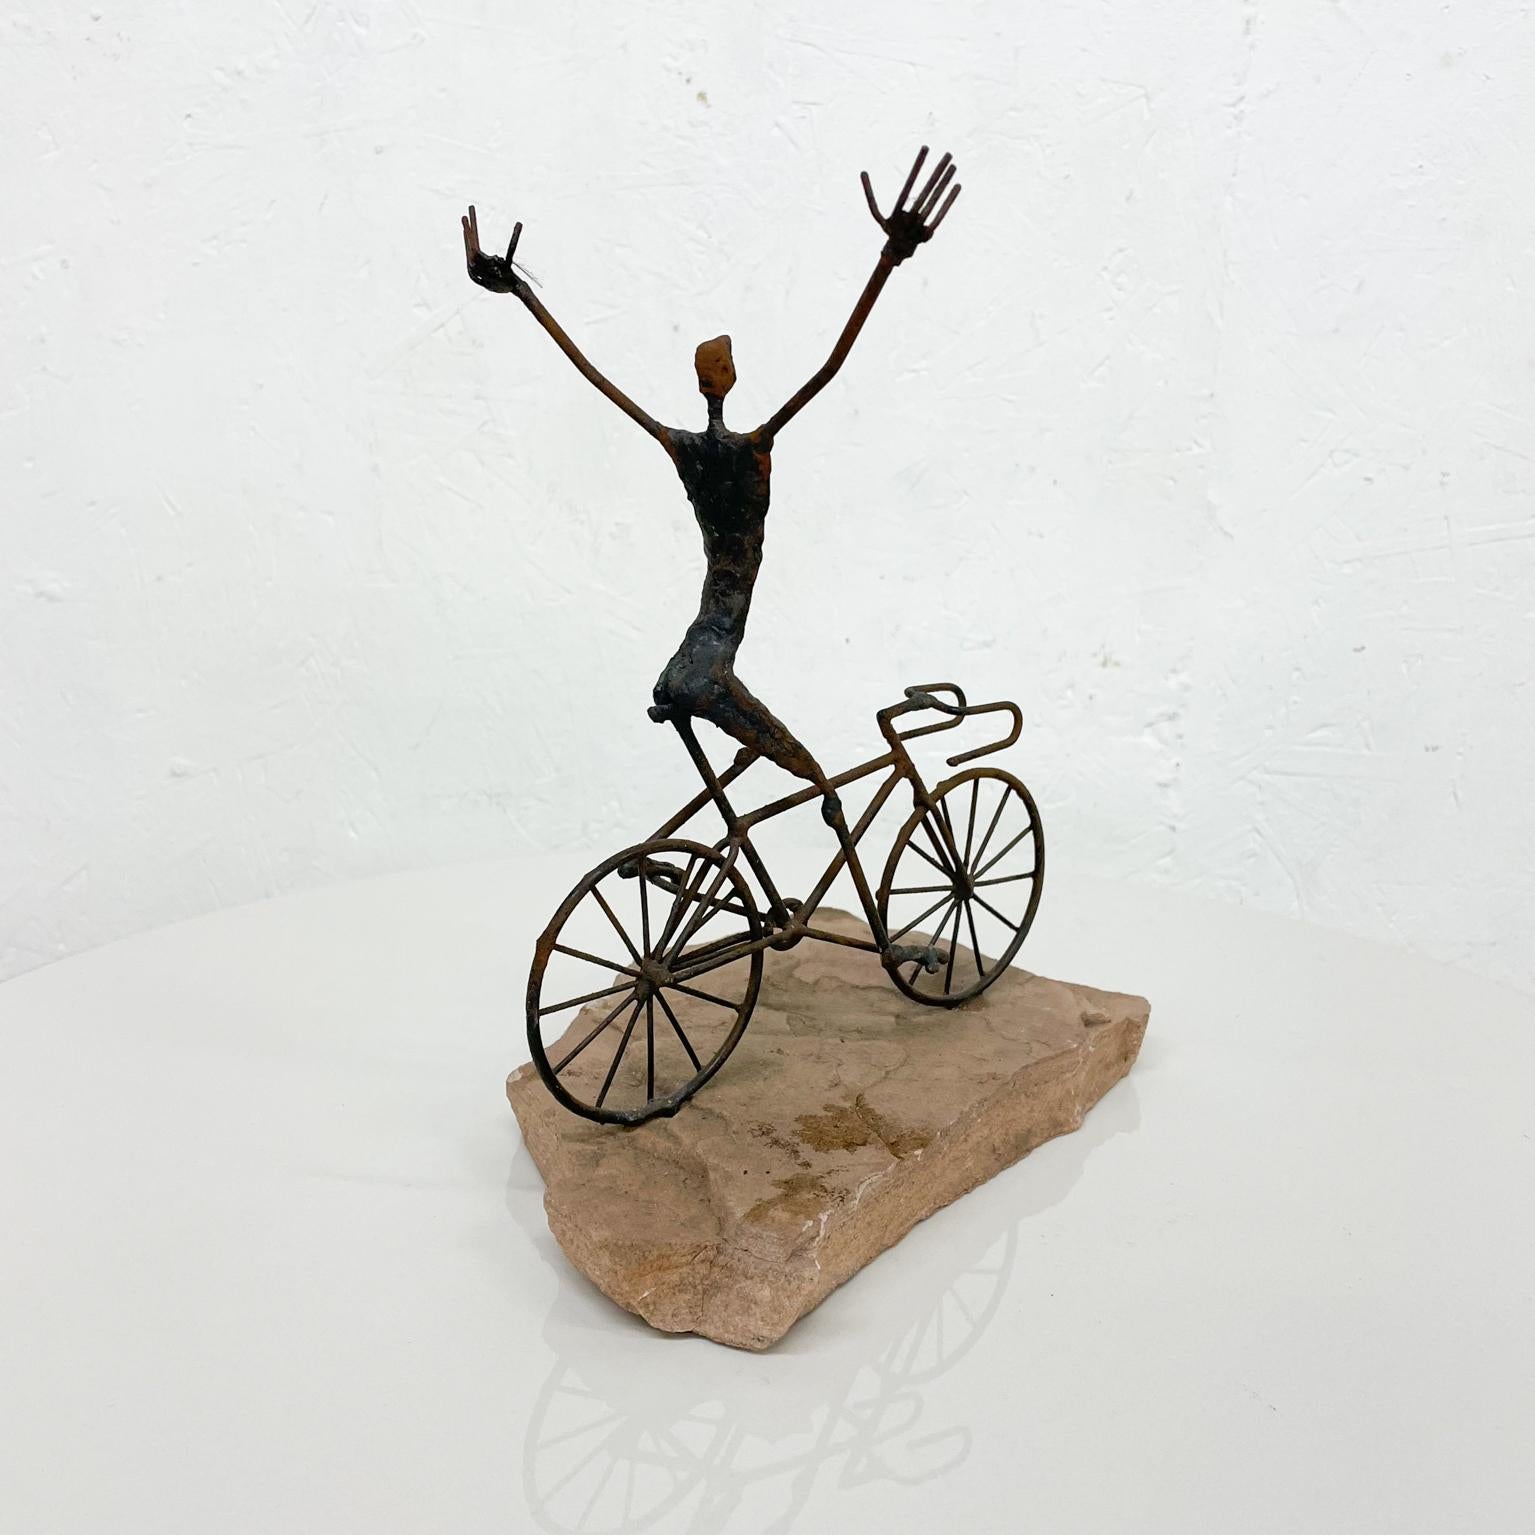 Bicycle Art Metal Sculpture on Stone in the Style of Jack Boyd 1970s 1